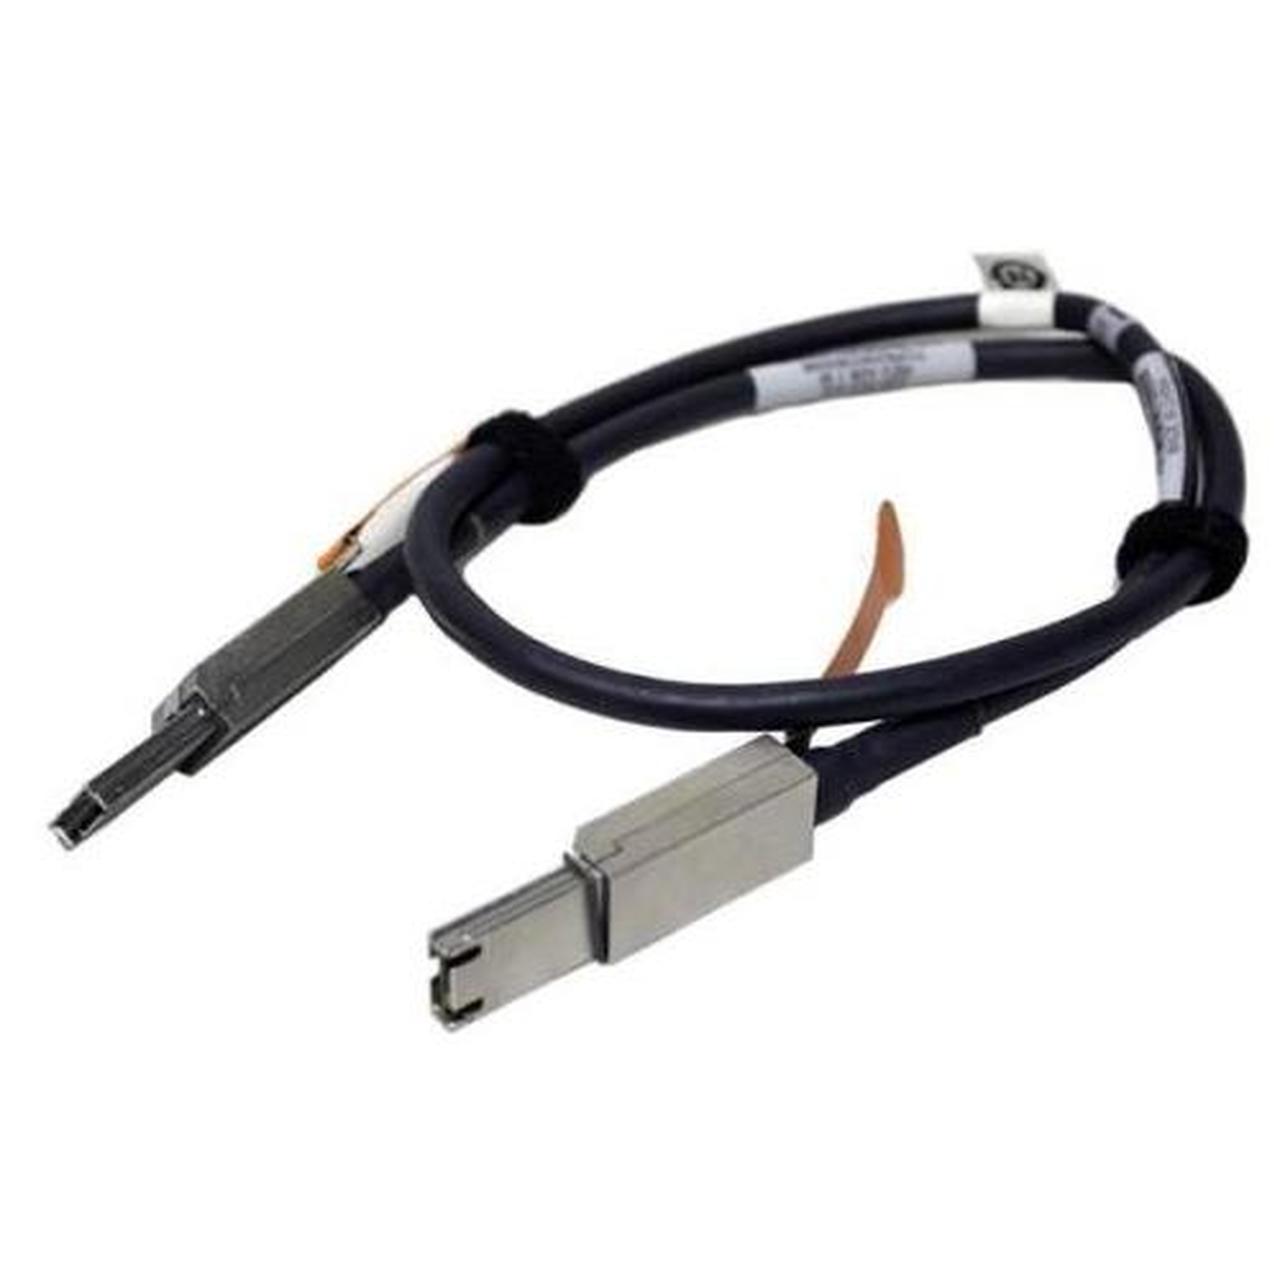 038-003-626 EMC 1M Expansion SAS Cable SFF-8088 to SFF-8088